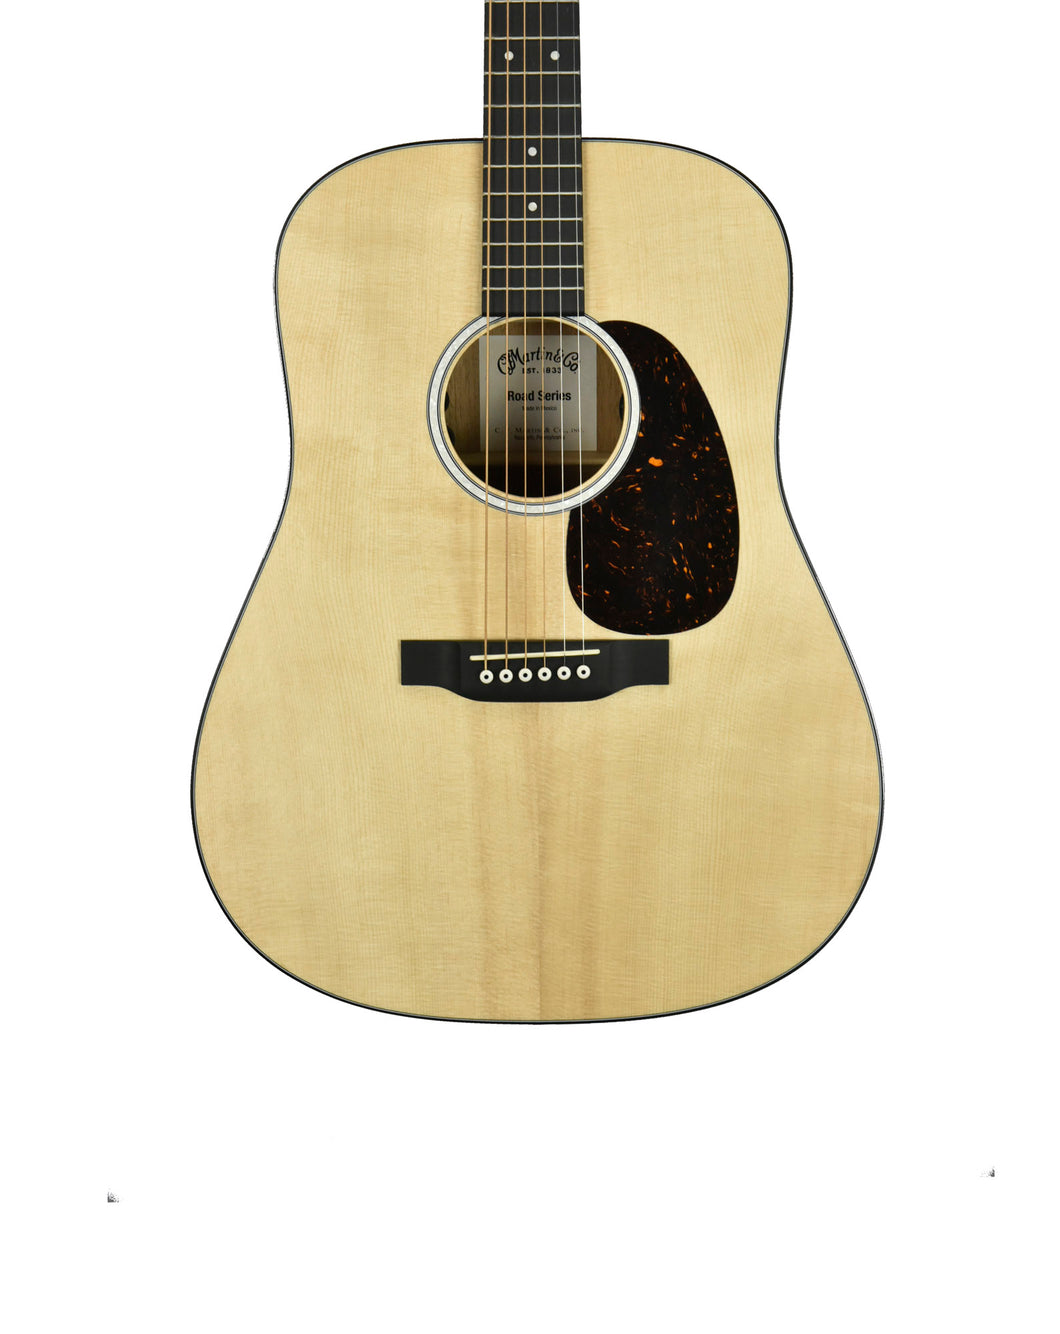 Martin D-10E Road Series Acoustic-Electric Guitar - Spruce Top - 2719023 - The Music Gallery